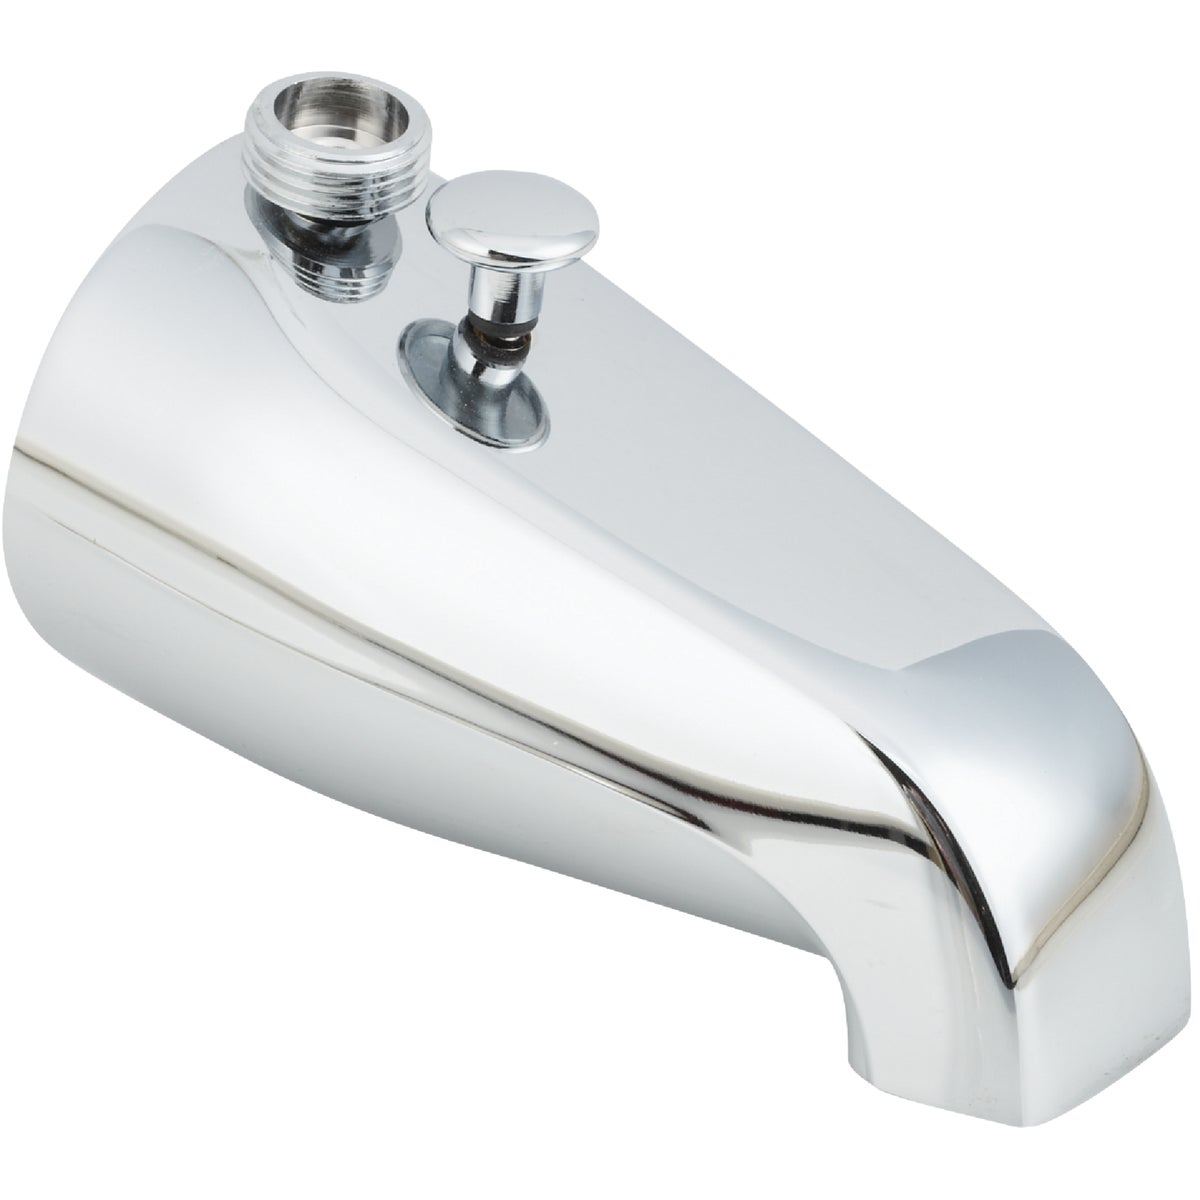 Item 450677, Top mount threaded outlet for use with hand held personal showers.